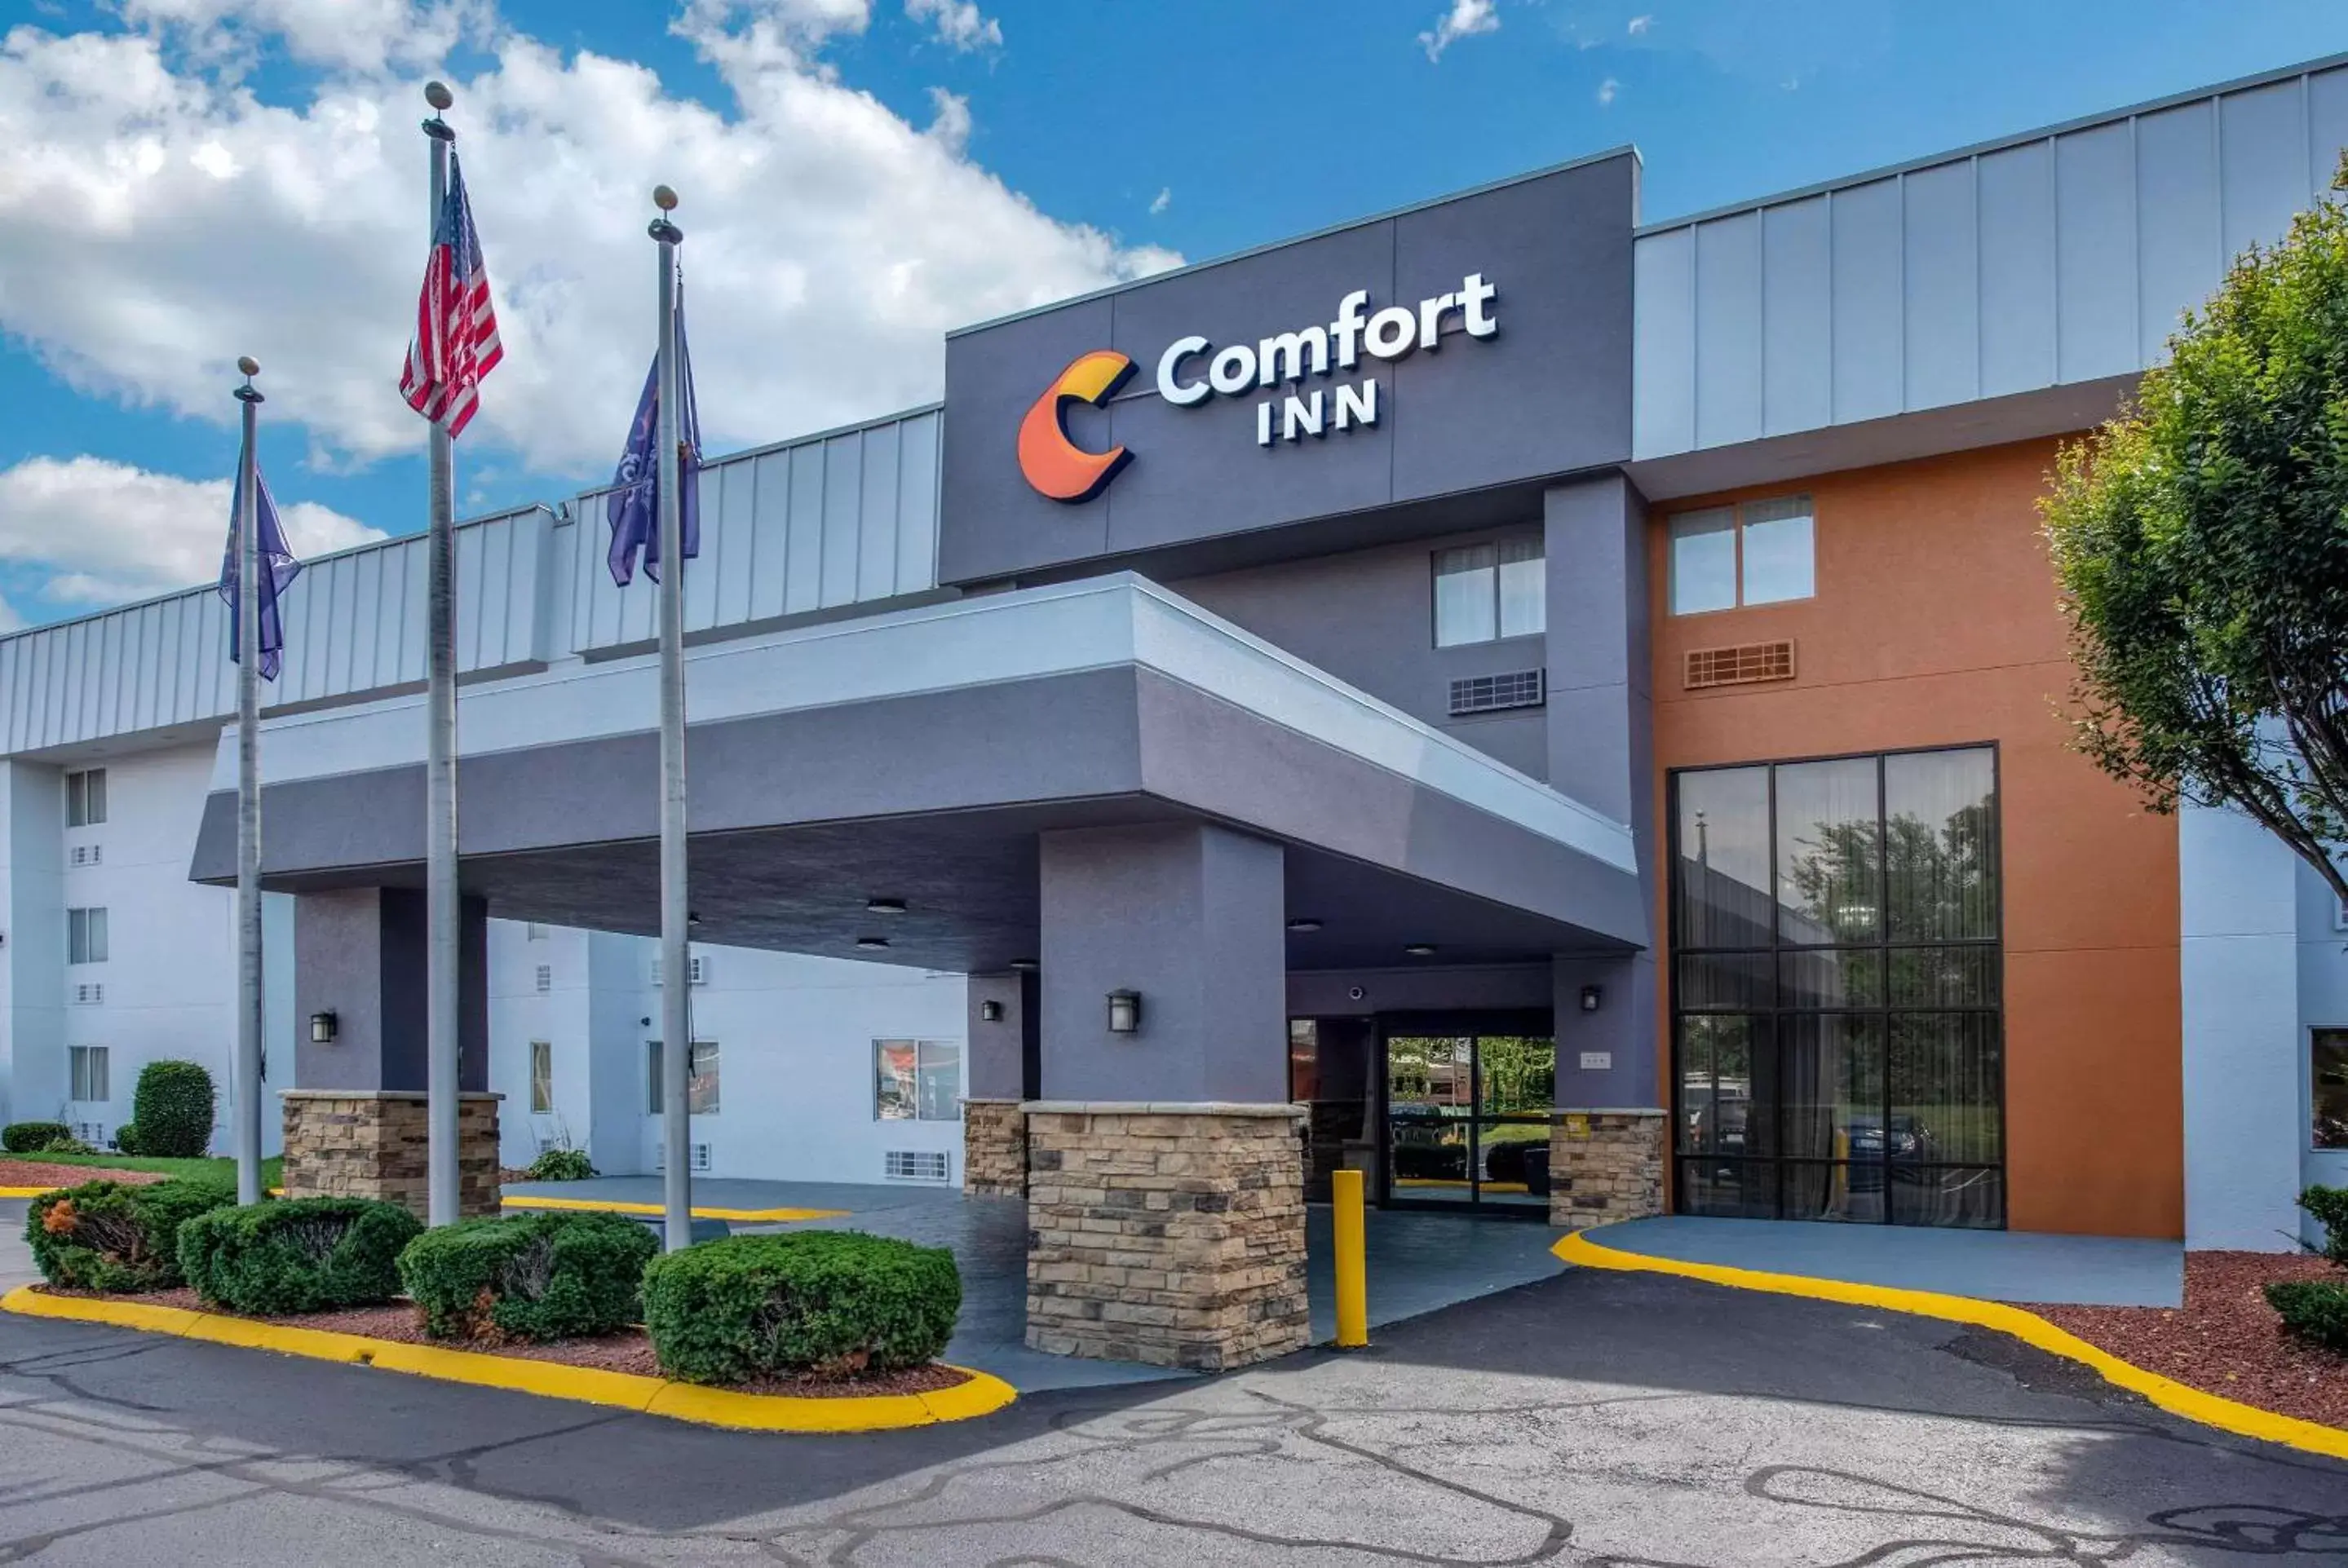 Property building in Comfort Inn South